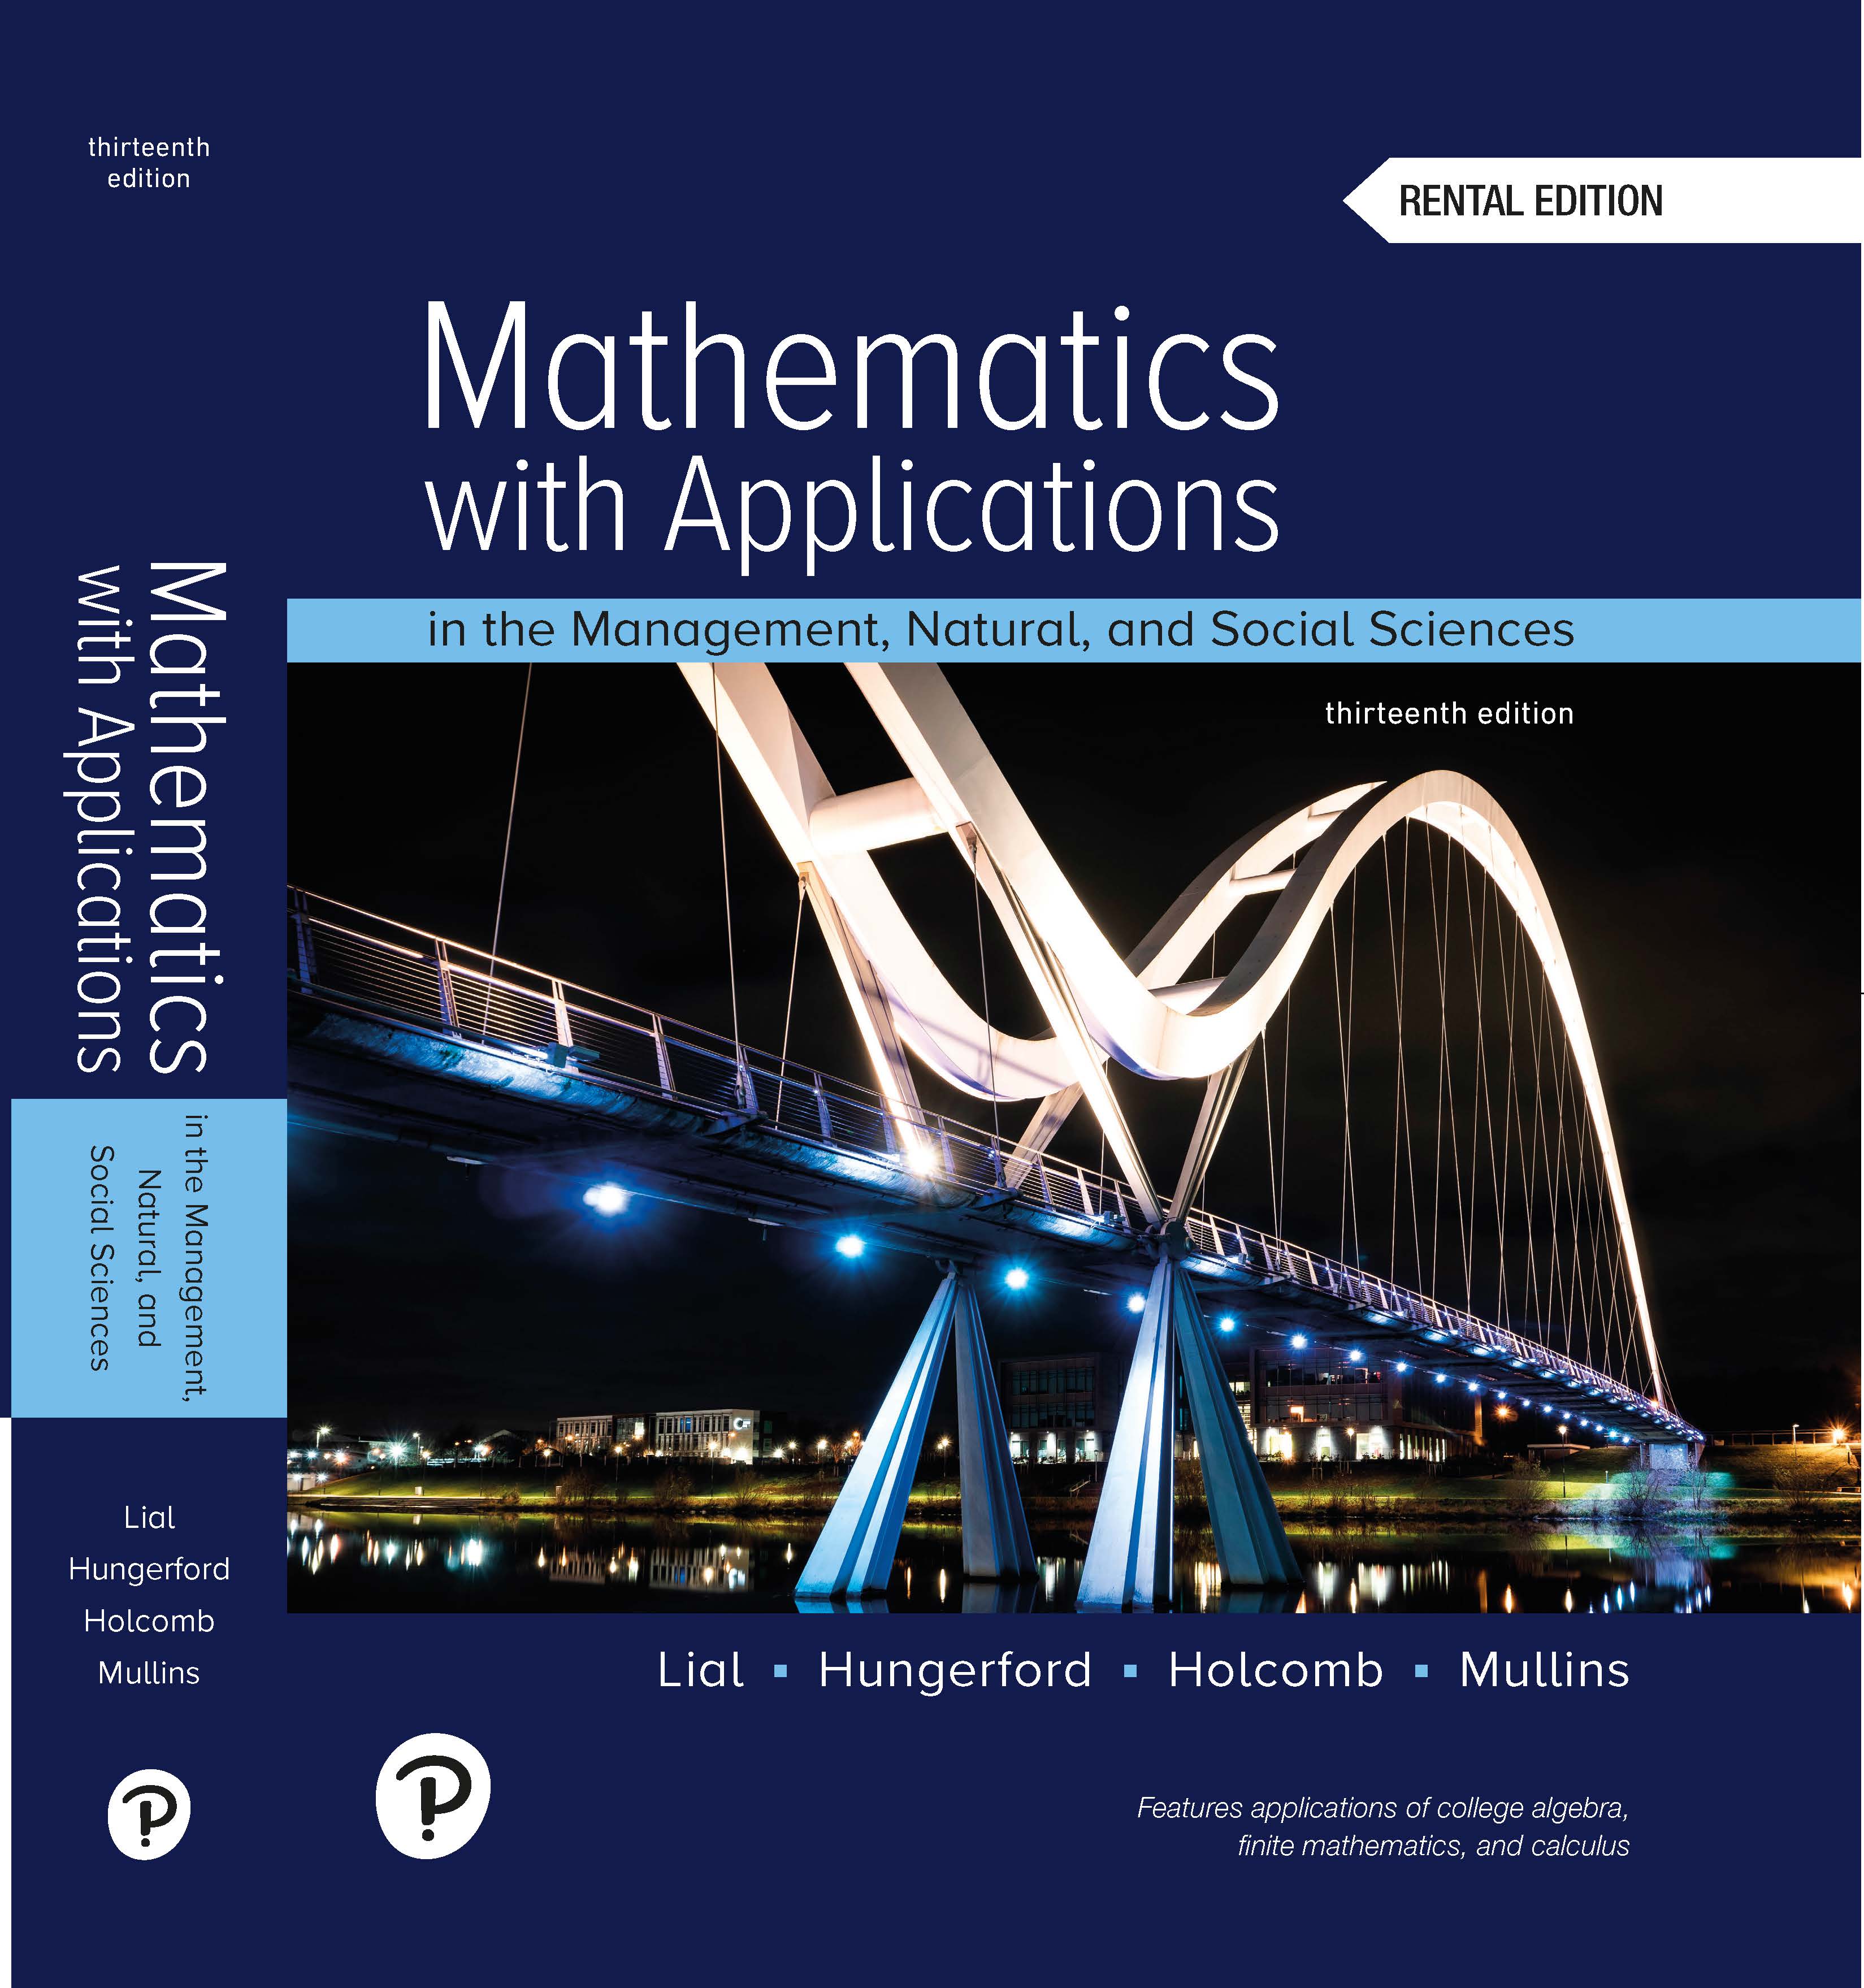 Front cover of Mathematics with Applications in the Management, Natural, and Social Sciences, thirteenth edition, rental version, with Pearson logo